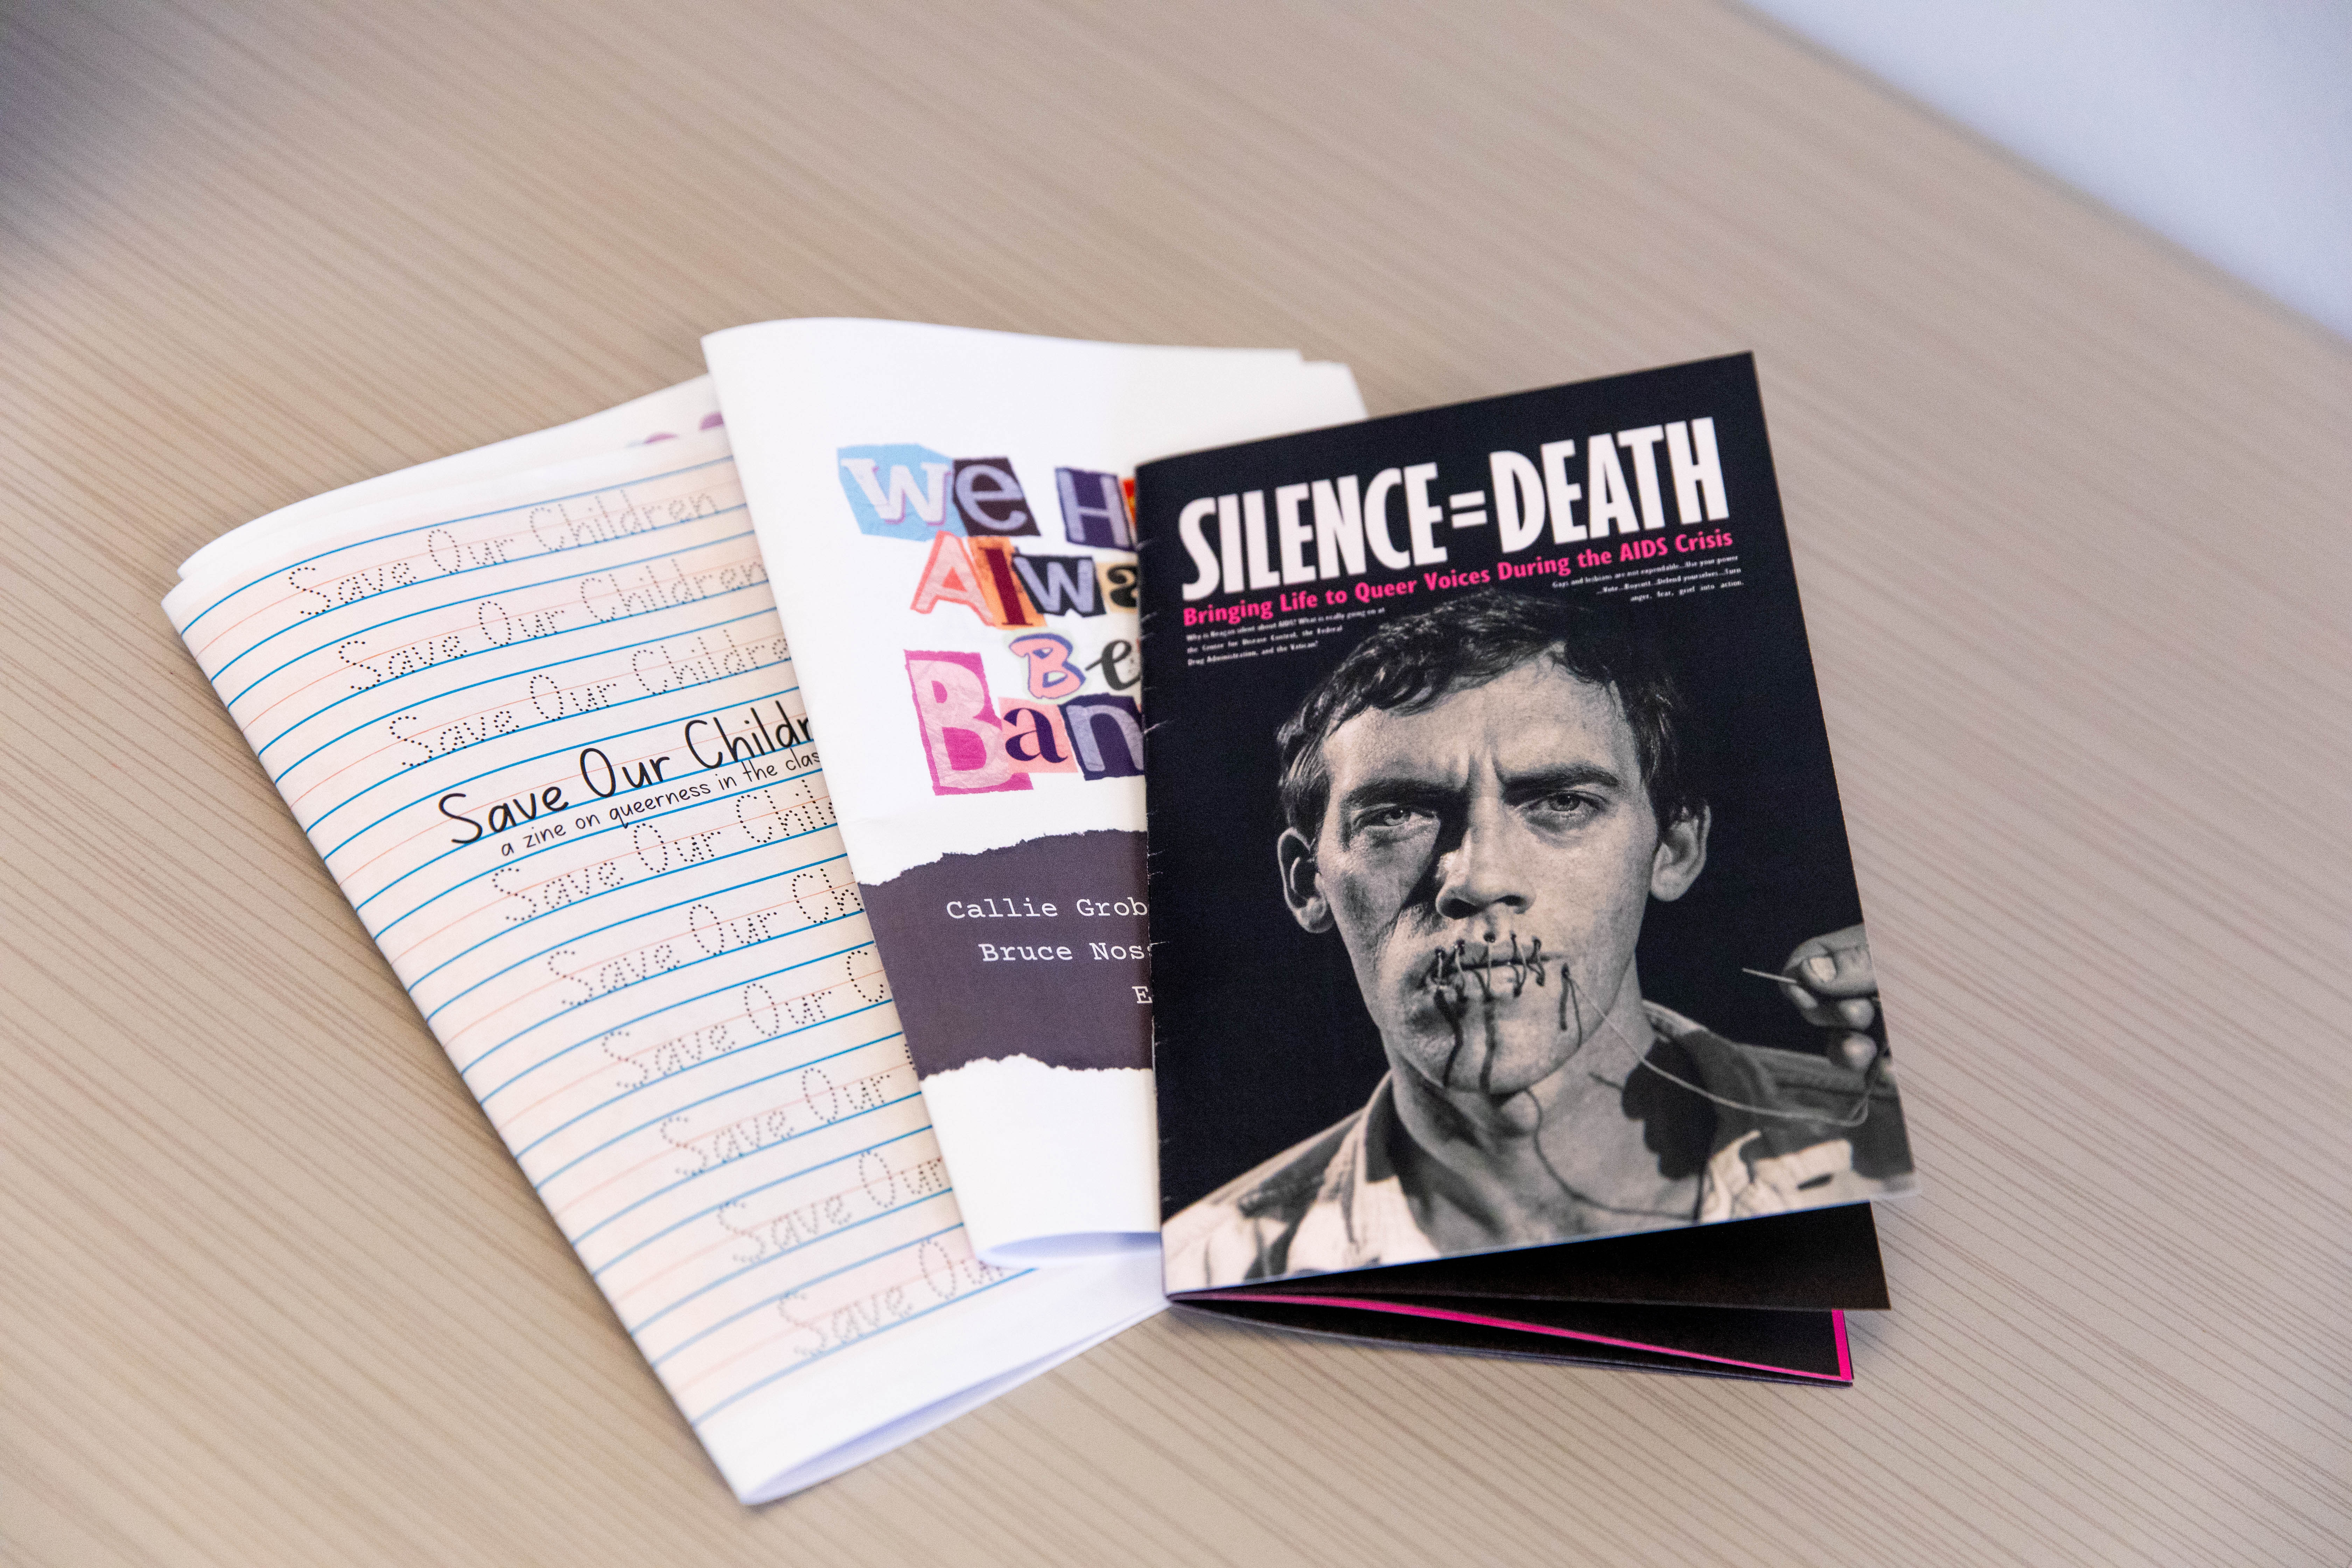 Three zines with the titles "Save Our Children," "We Have Always Been Banned" and "Silence=Death"